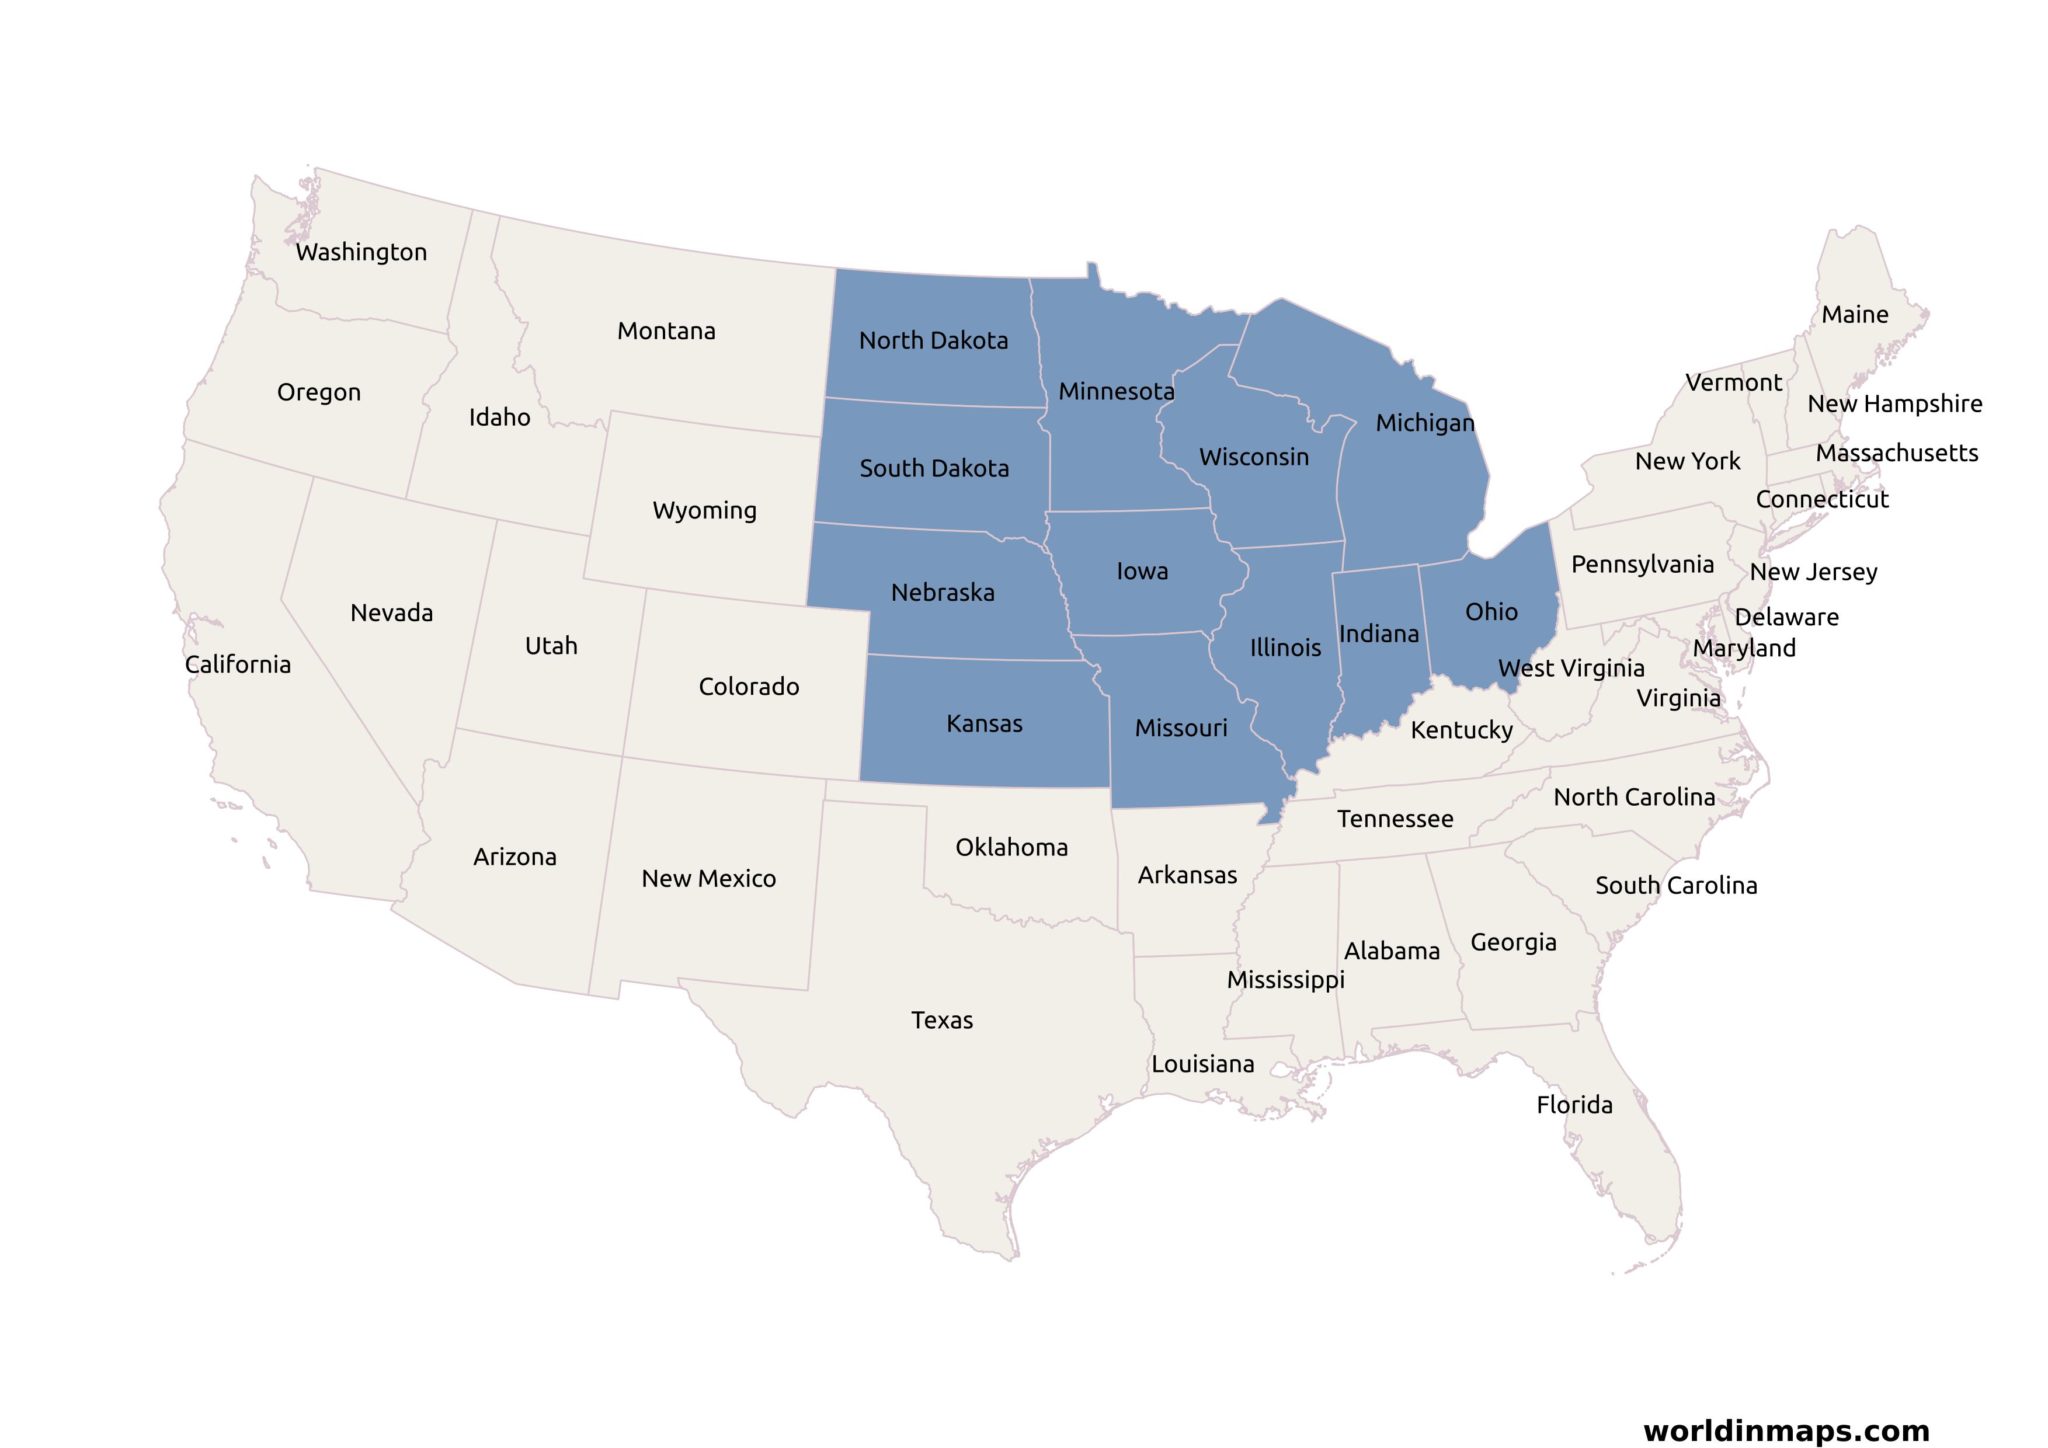 Midwest Midwestern United States World In Maps